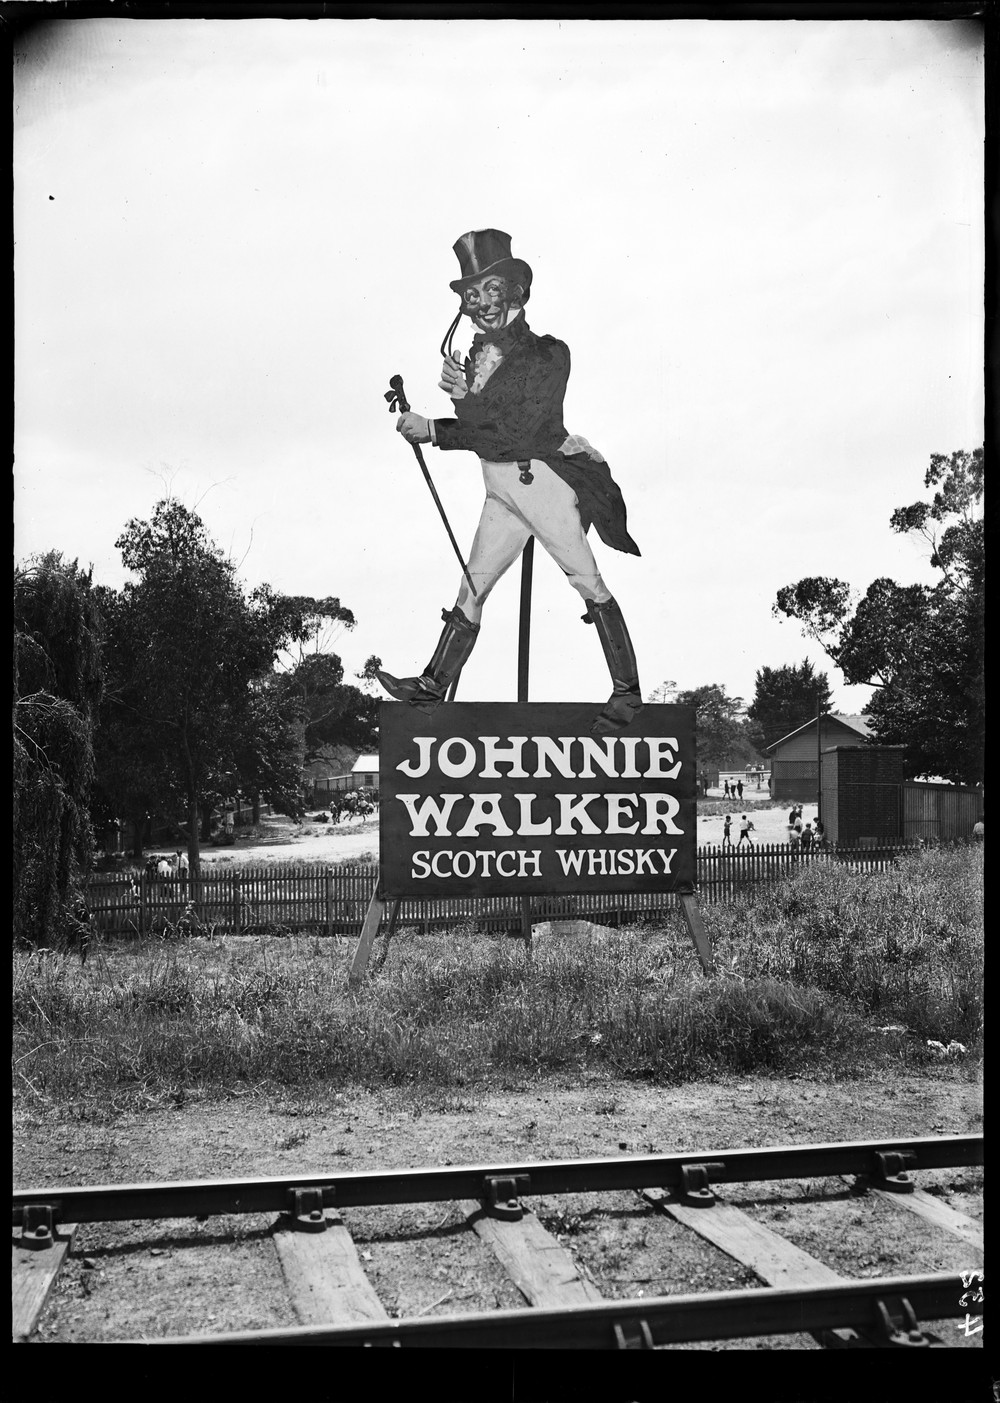 ad for johnnie walker